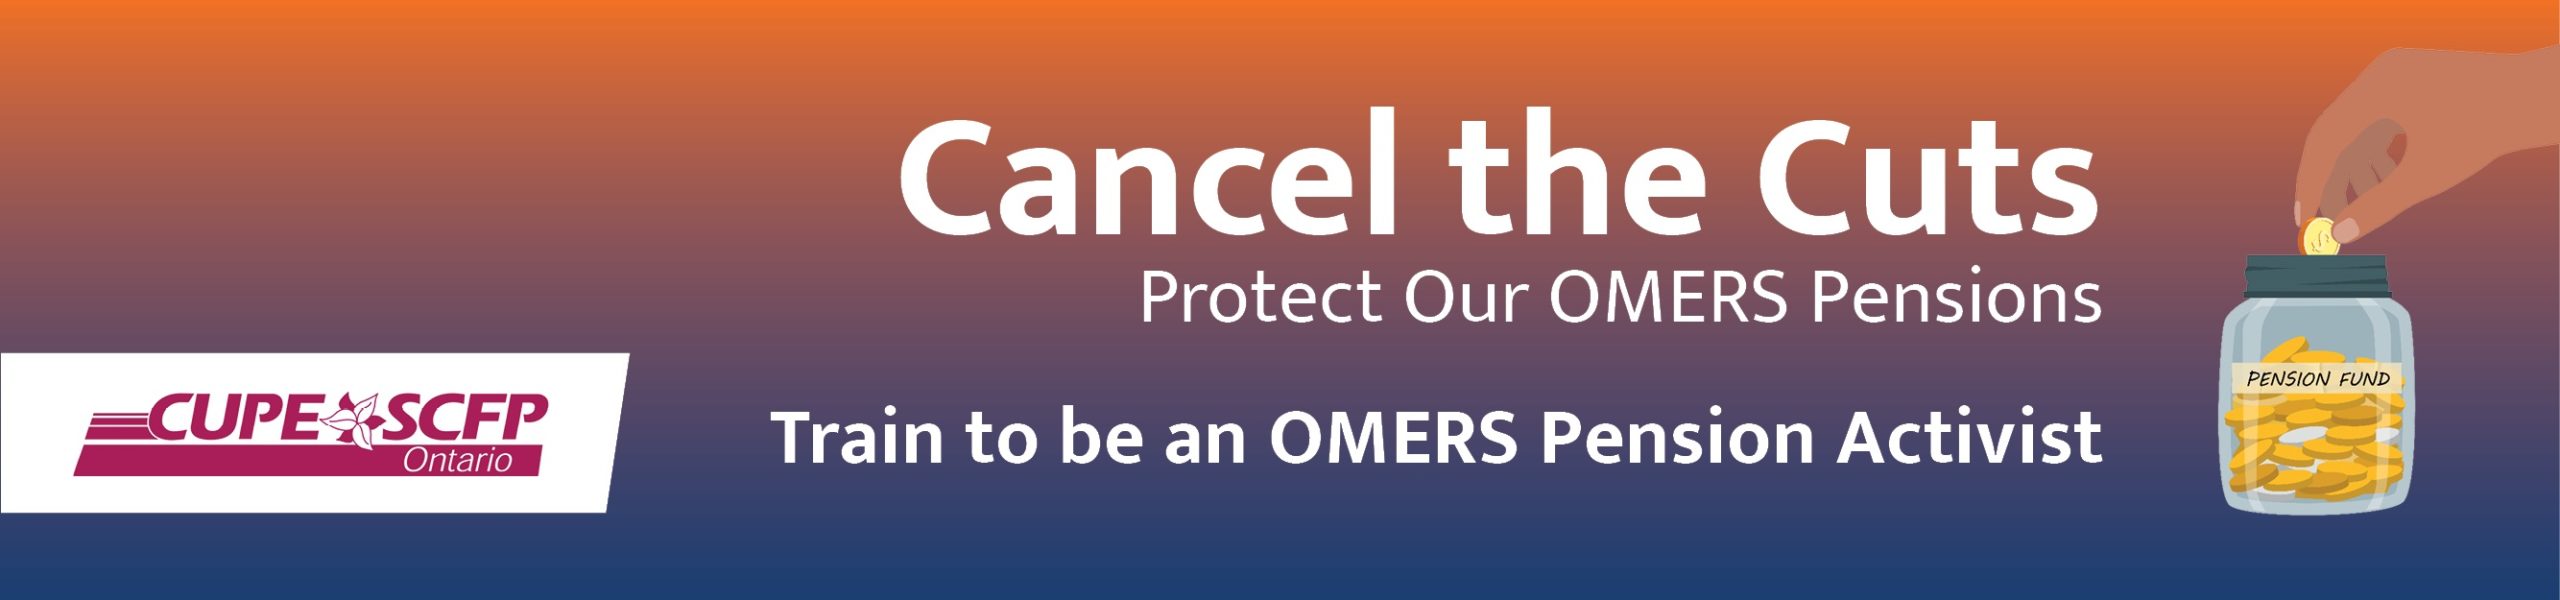 Cancel the Cuts Protect Our OMERS Pensions Train to be an OMERS Pension Activist Pension Fund CUPE SCFP Ontario